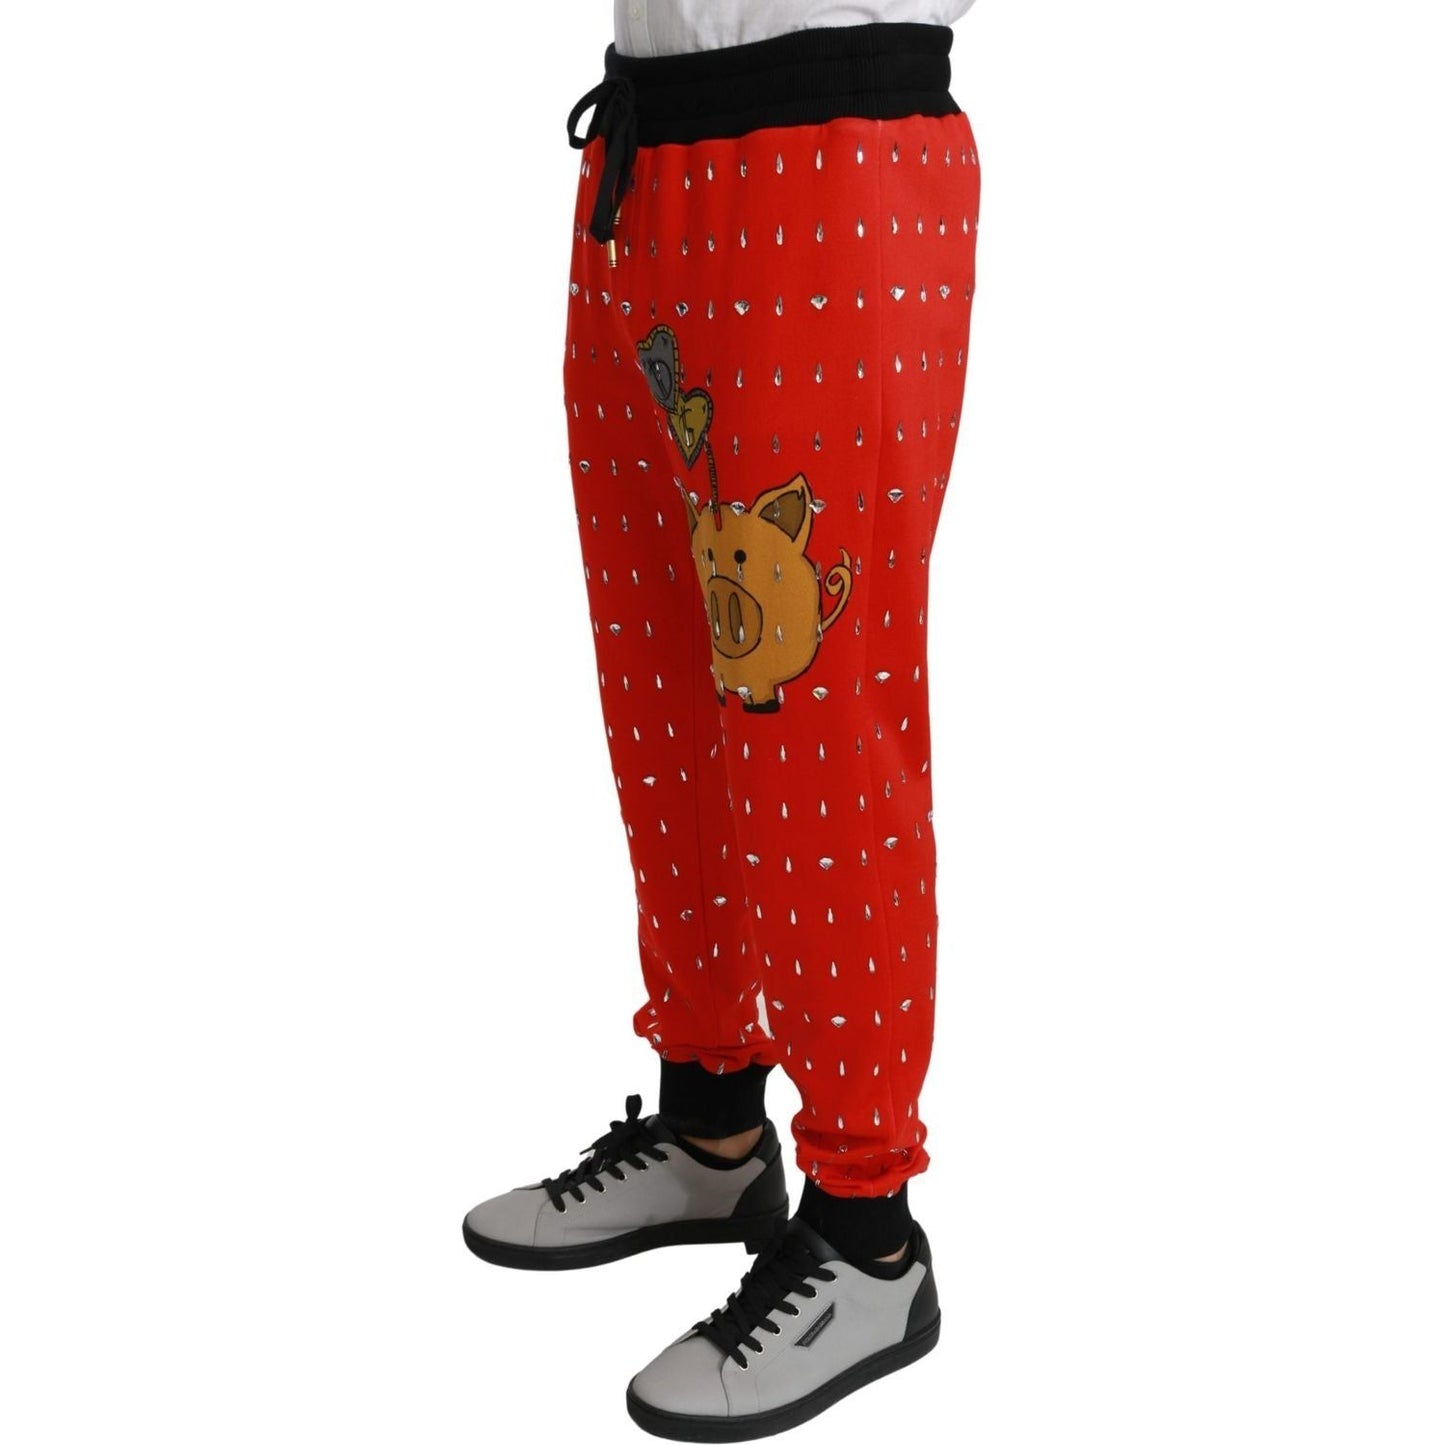 Dolce & Gabbana Chic Red Piggy Bank Print Sweatpants red-piggy-bank-cotton-crystal-trousers-pants